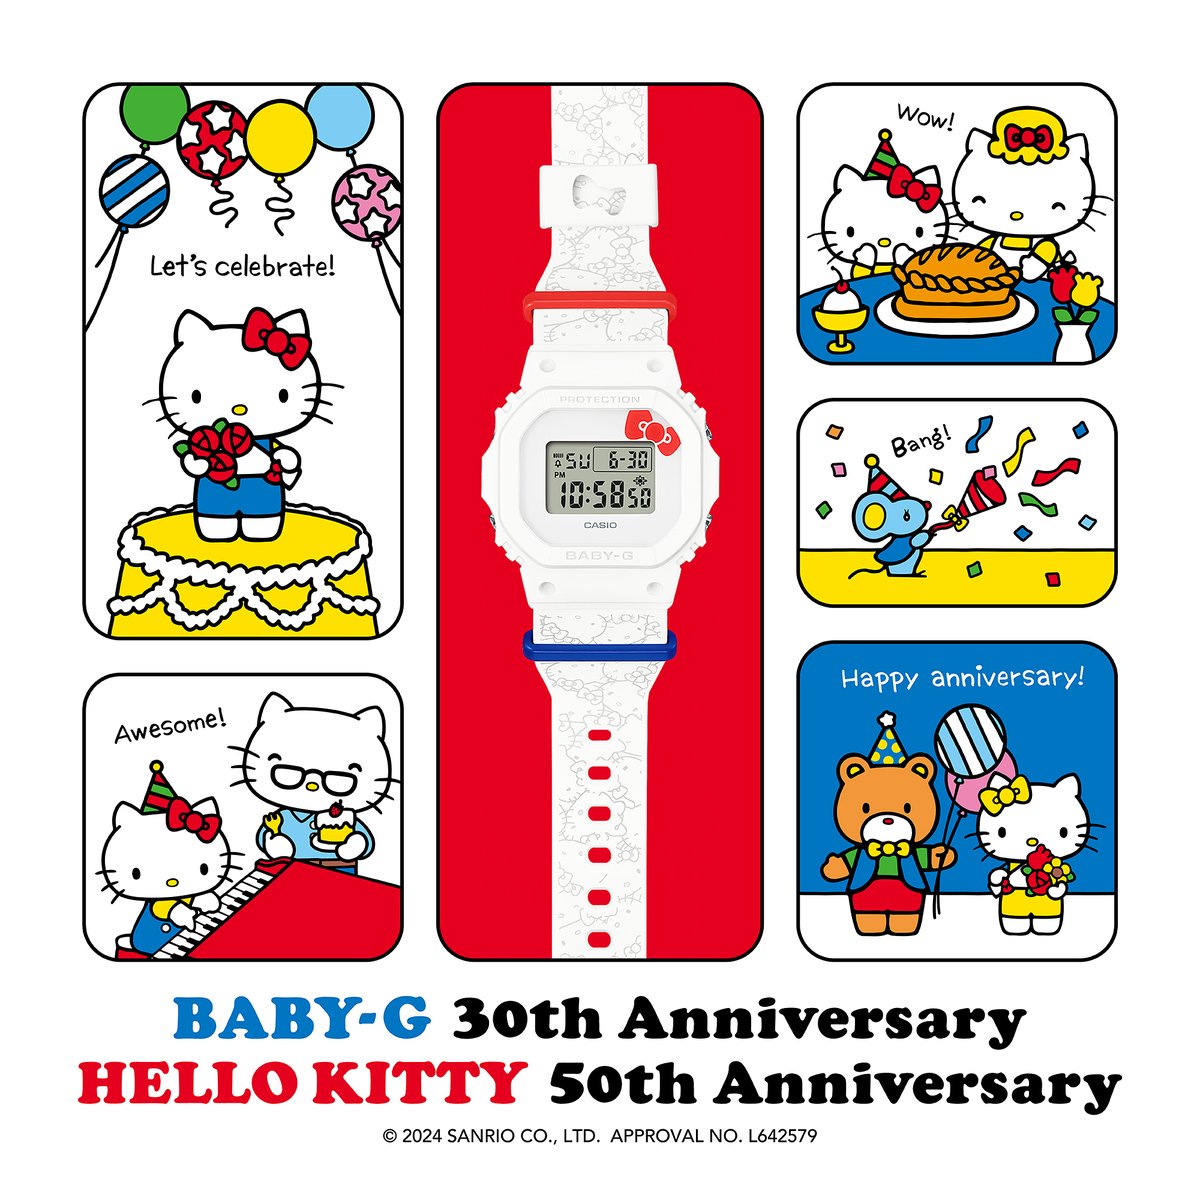 We're sharing an anniversary this year with the one and only @HelloKitty!🎉🎂Join us in celebrating Hello Kitty and BABY-G's double anniversary with our special collaboration watch, decorated with 50 of Hello Kitty's cutest expressions to celebrate 50 iconic years!